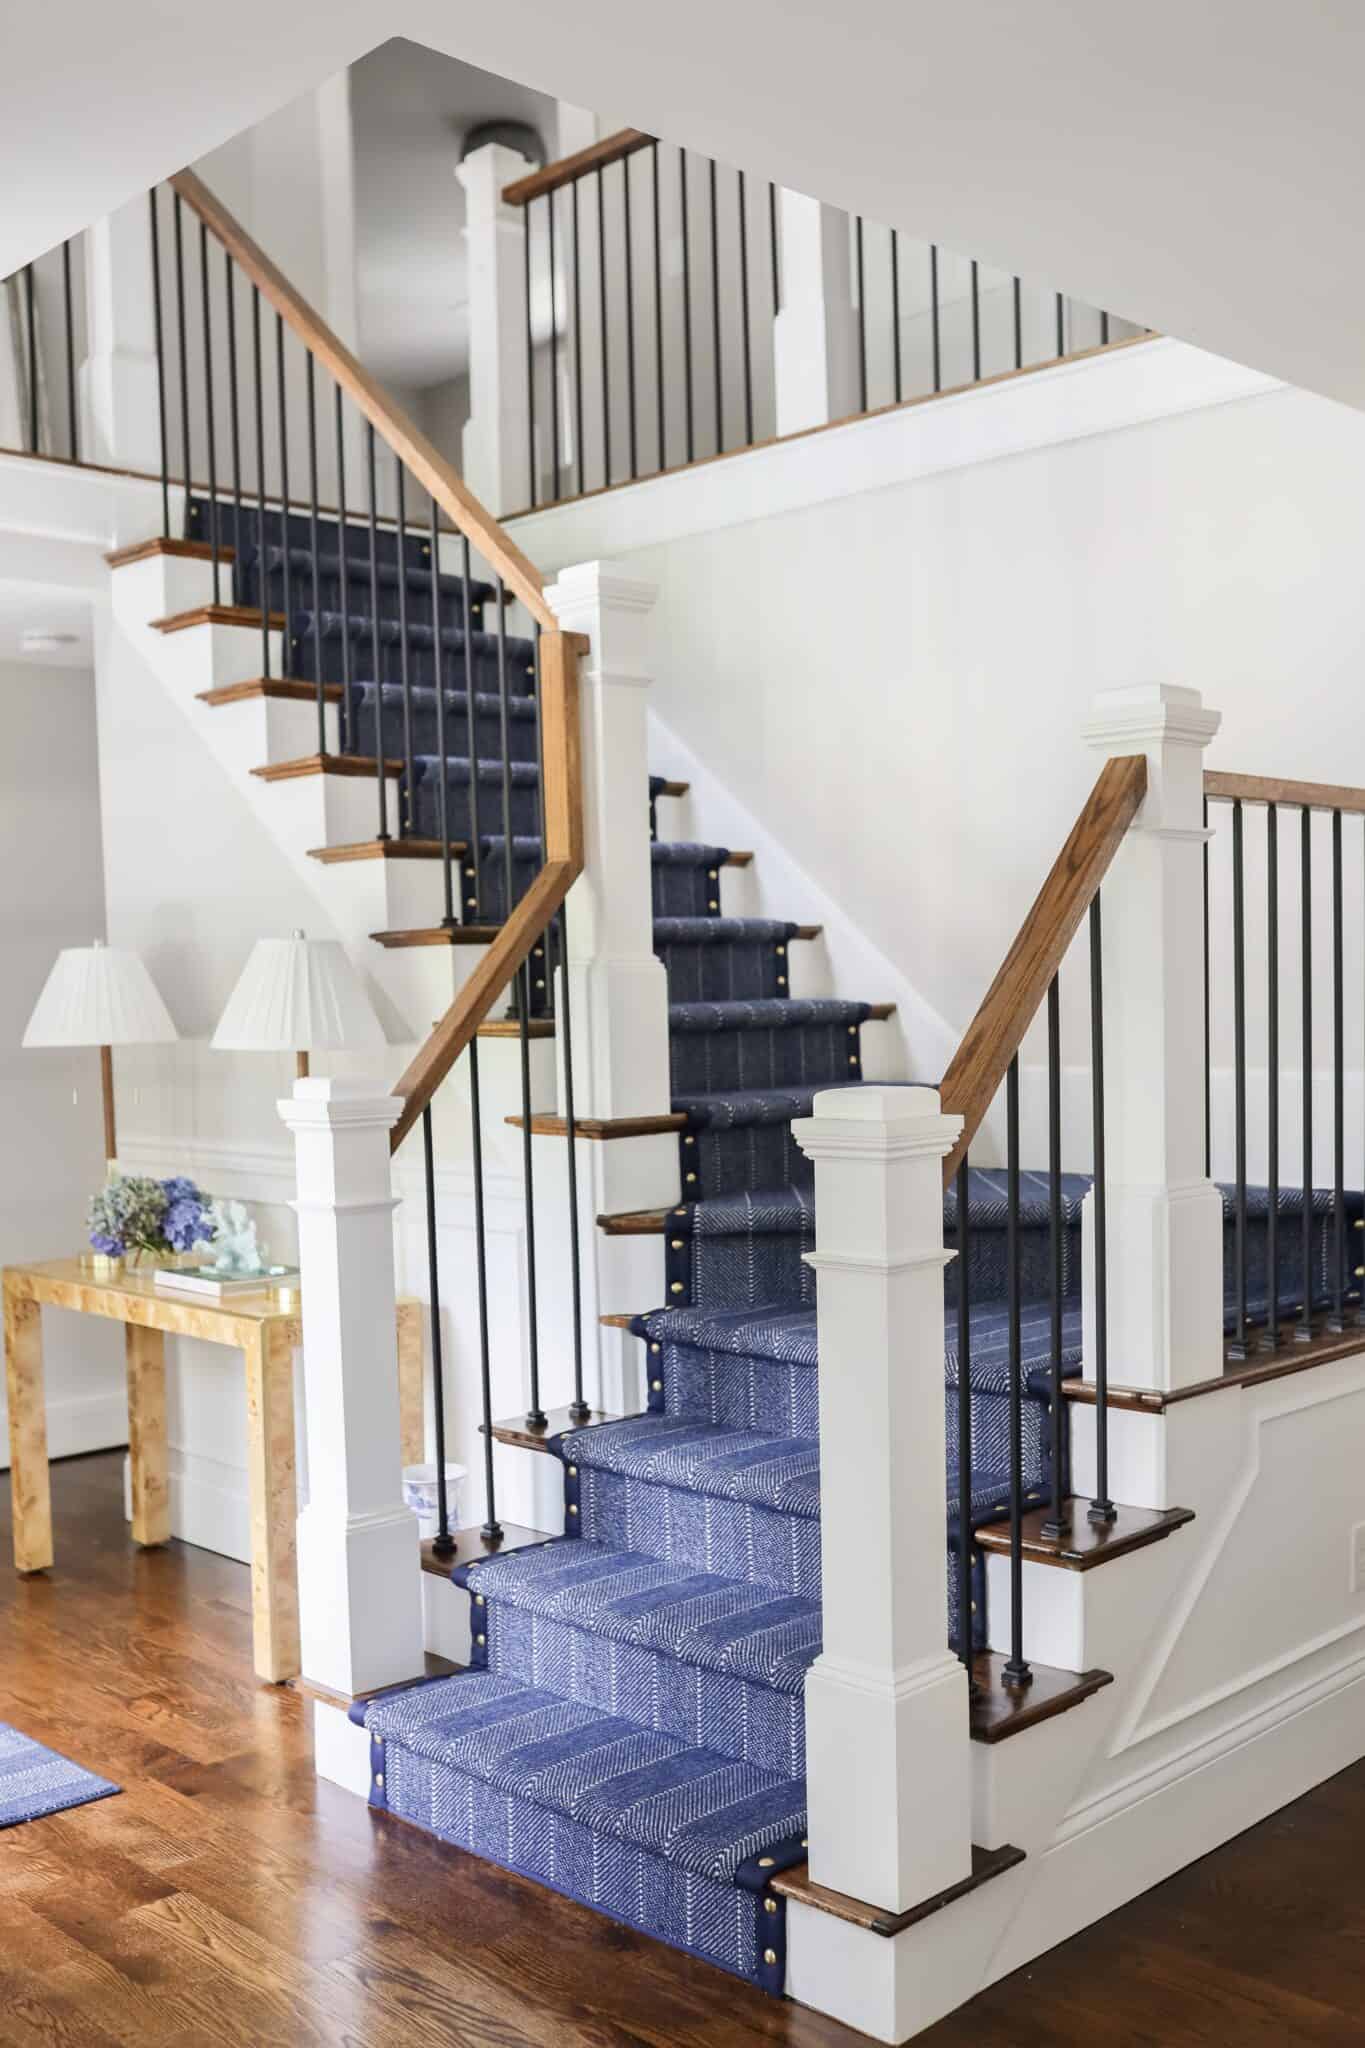 This is a navy blue with white stripe carpet hollywood cheveron style stair runner with blue wide binding with details ensures that the carpet contours the stairs from top to bottom.